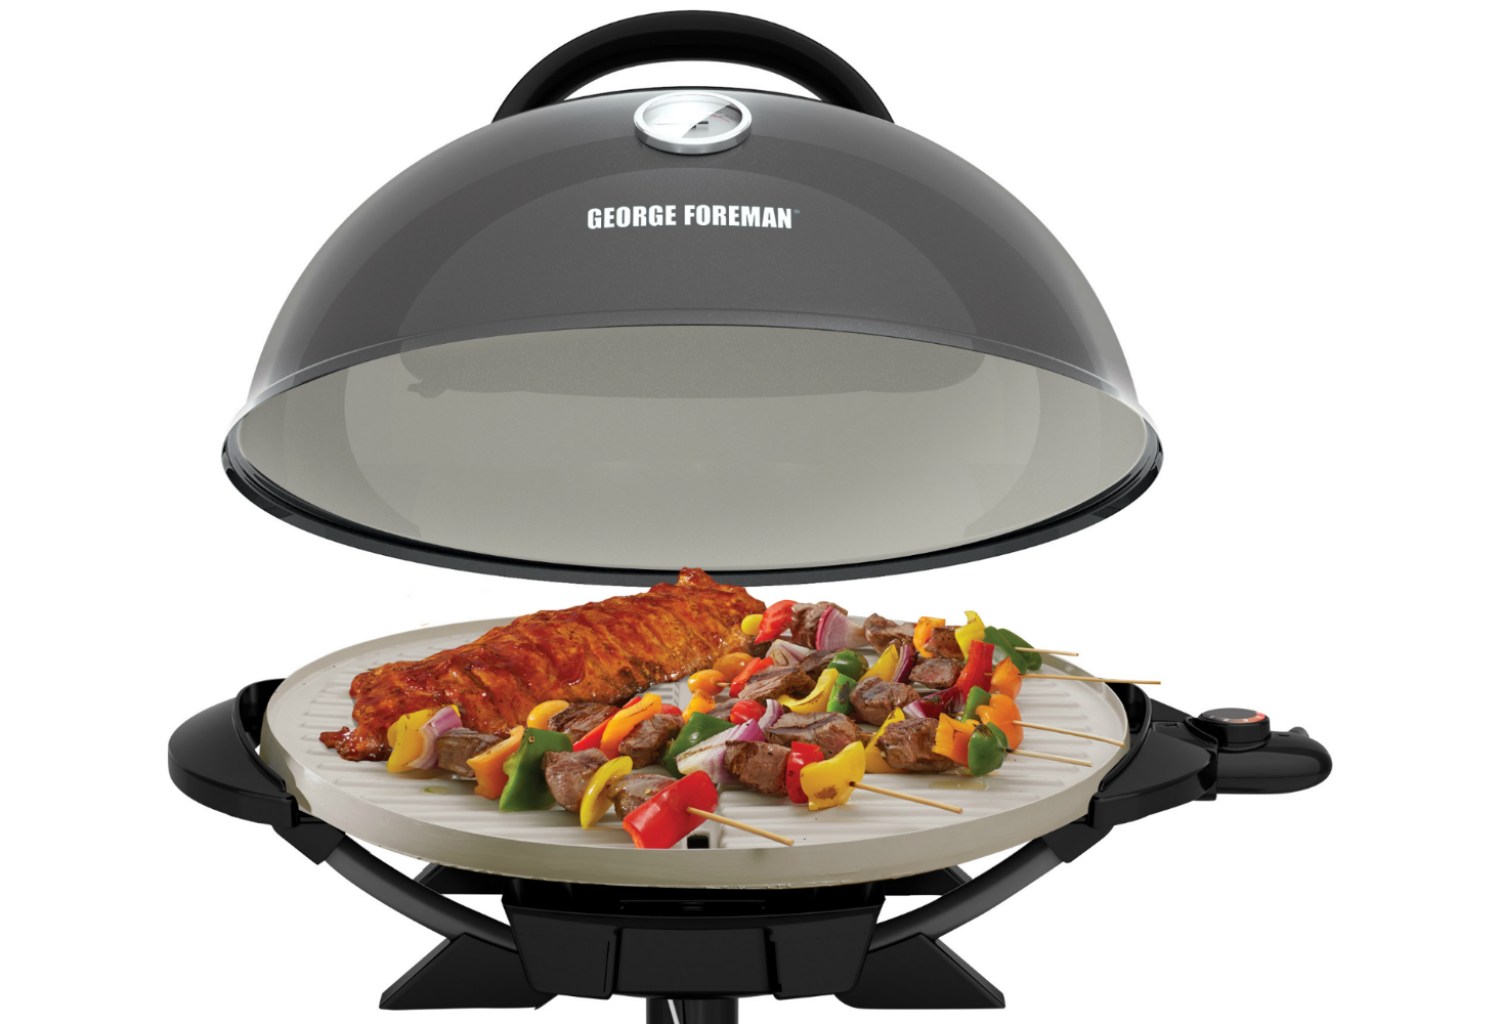 https://www.digitaltrends.com/wp-content/uploads/2019/05/george-foreman-15-serving-indoor-outdoor-electric-grill-with-ceramic-plates-3.jpg?resize=1500%2C1024&p=1